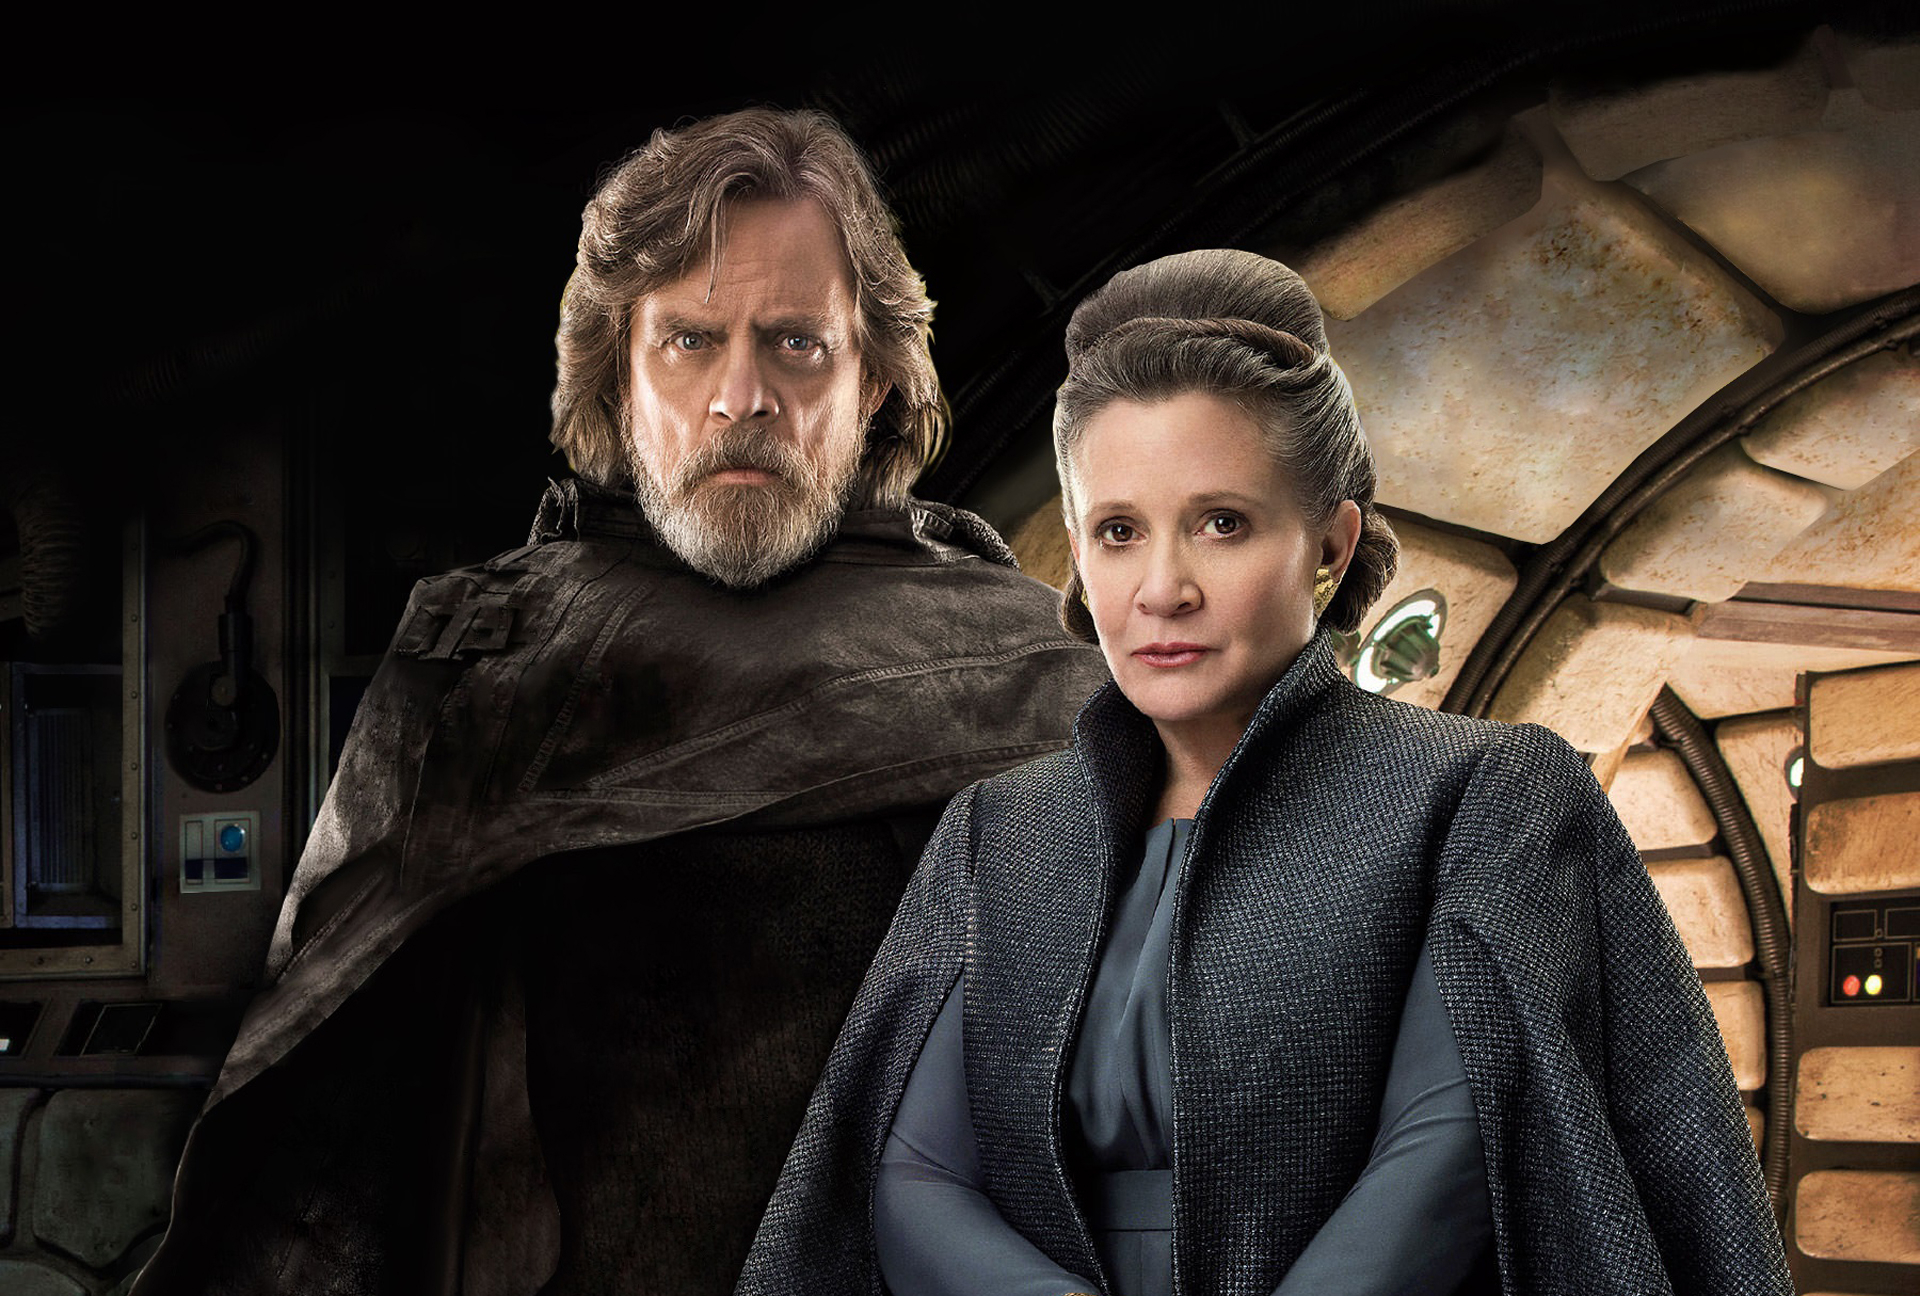 1920x1296 Princess Leia And Luke Skywalker In Star Wars The Last Jedi Movie, HD Movies, 4k Wallpapers, Images, Backgrounds, Photos and Pictures